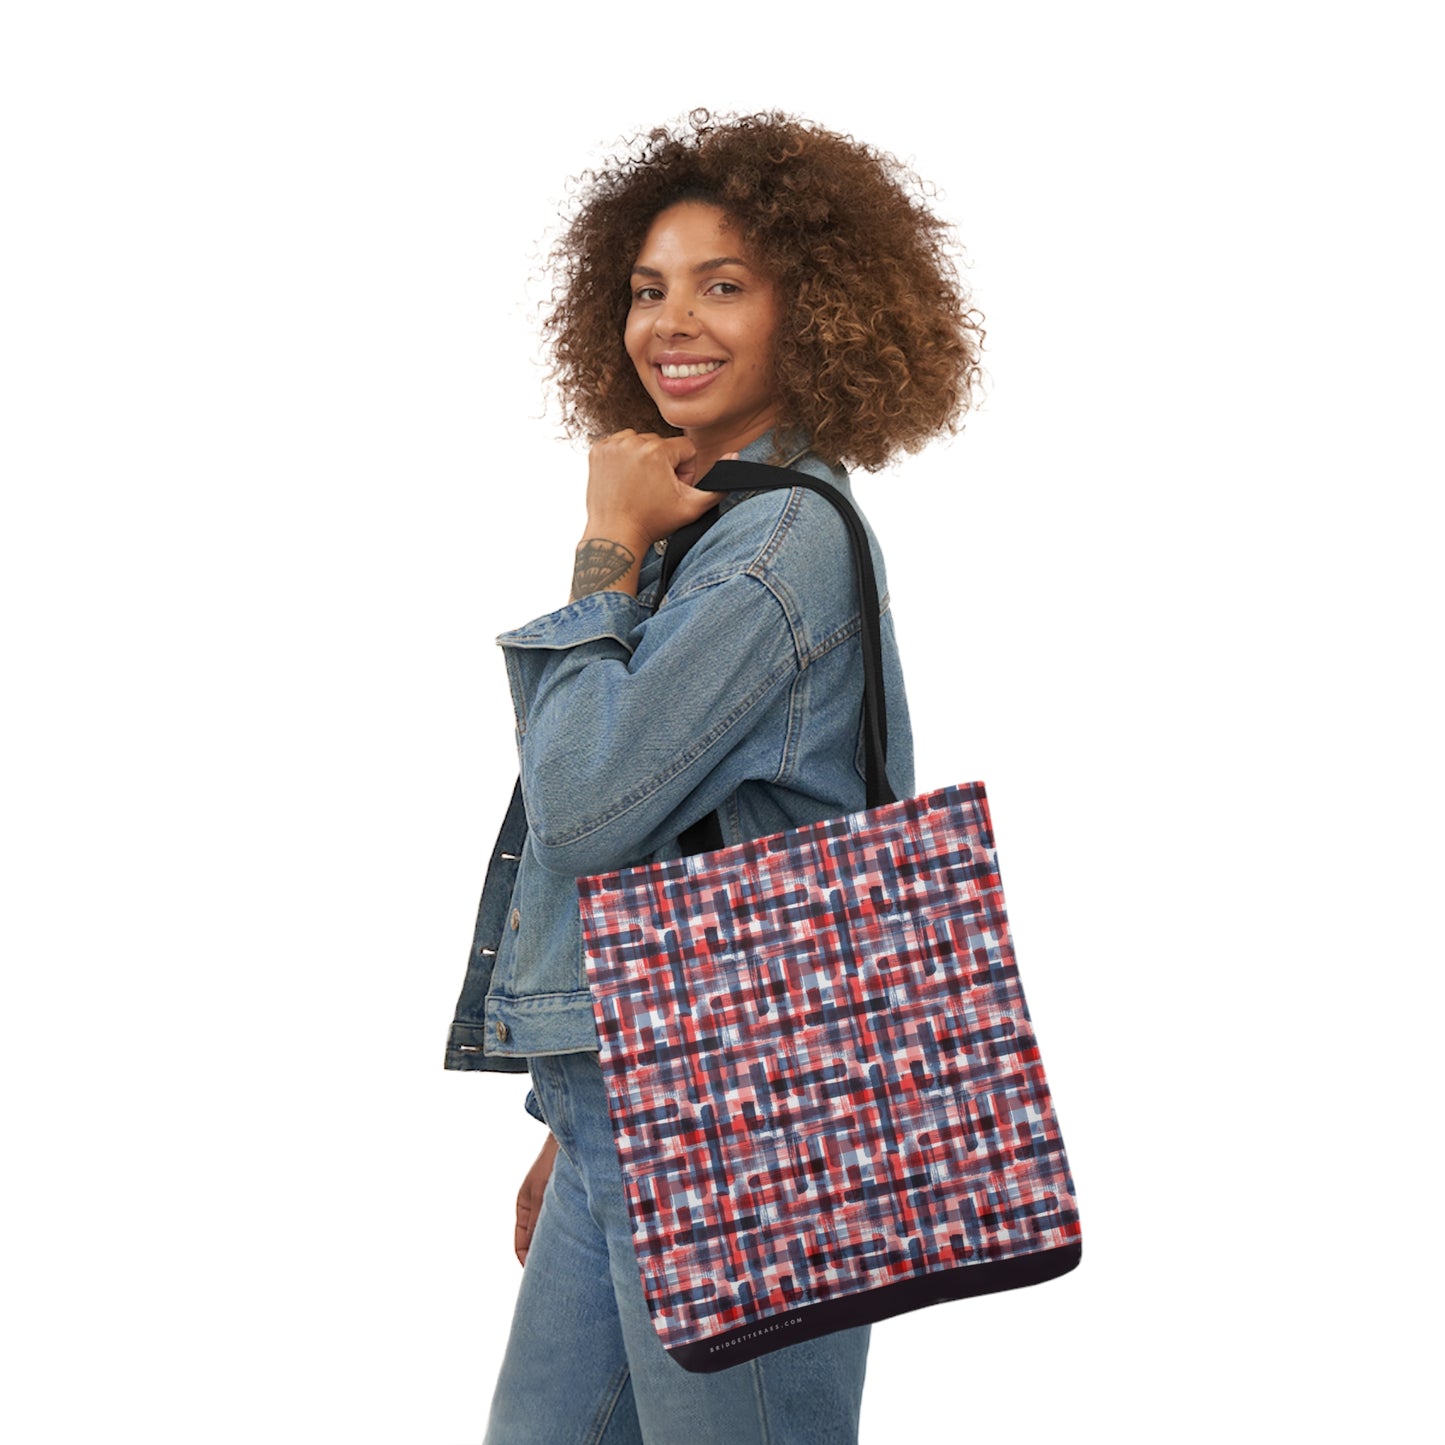 Marker Tweed Polyester Canvas Tote Bag